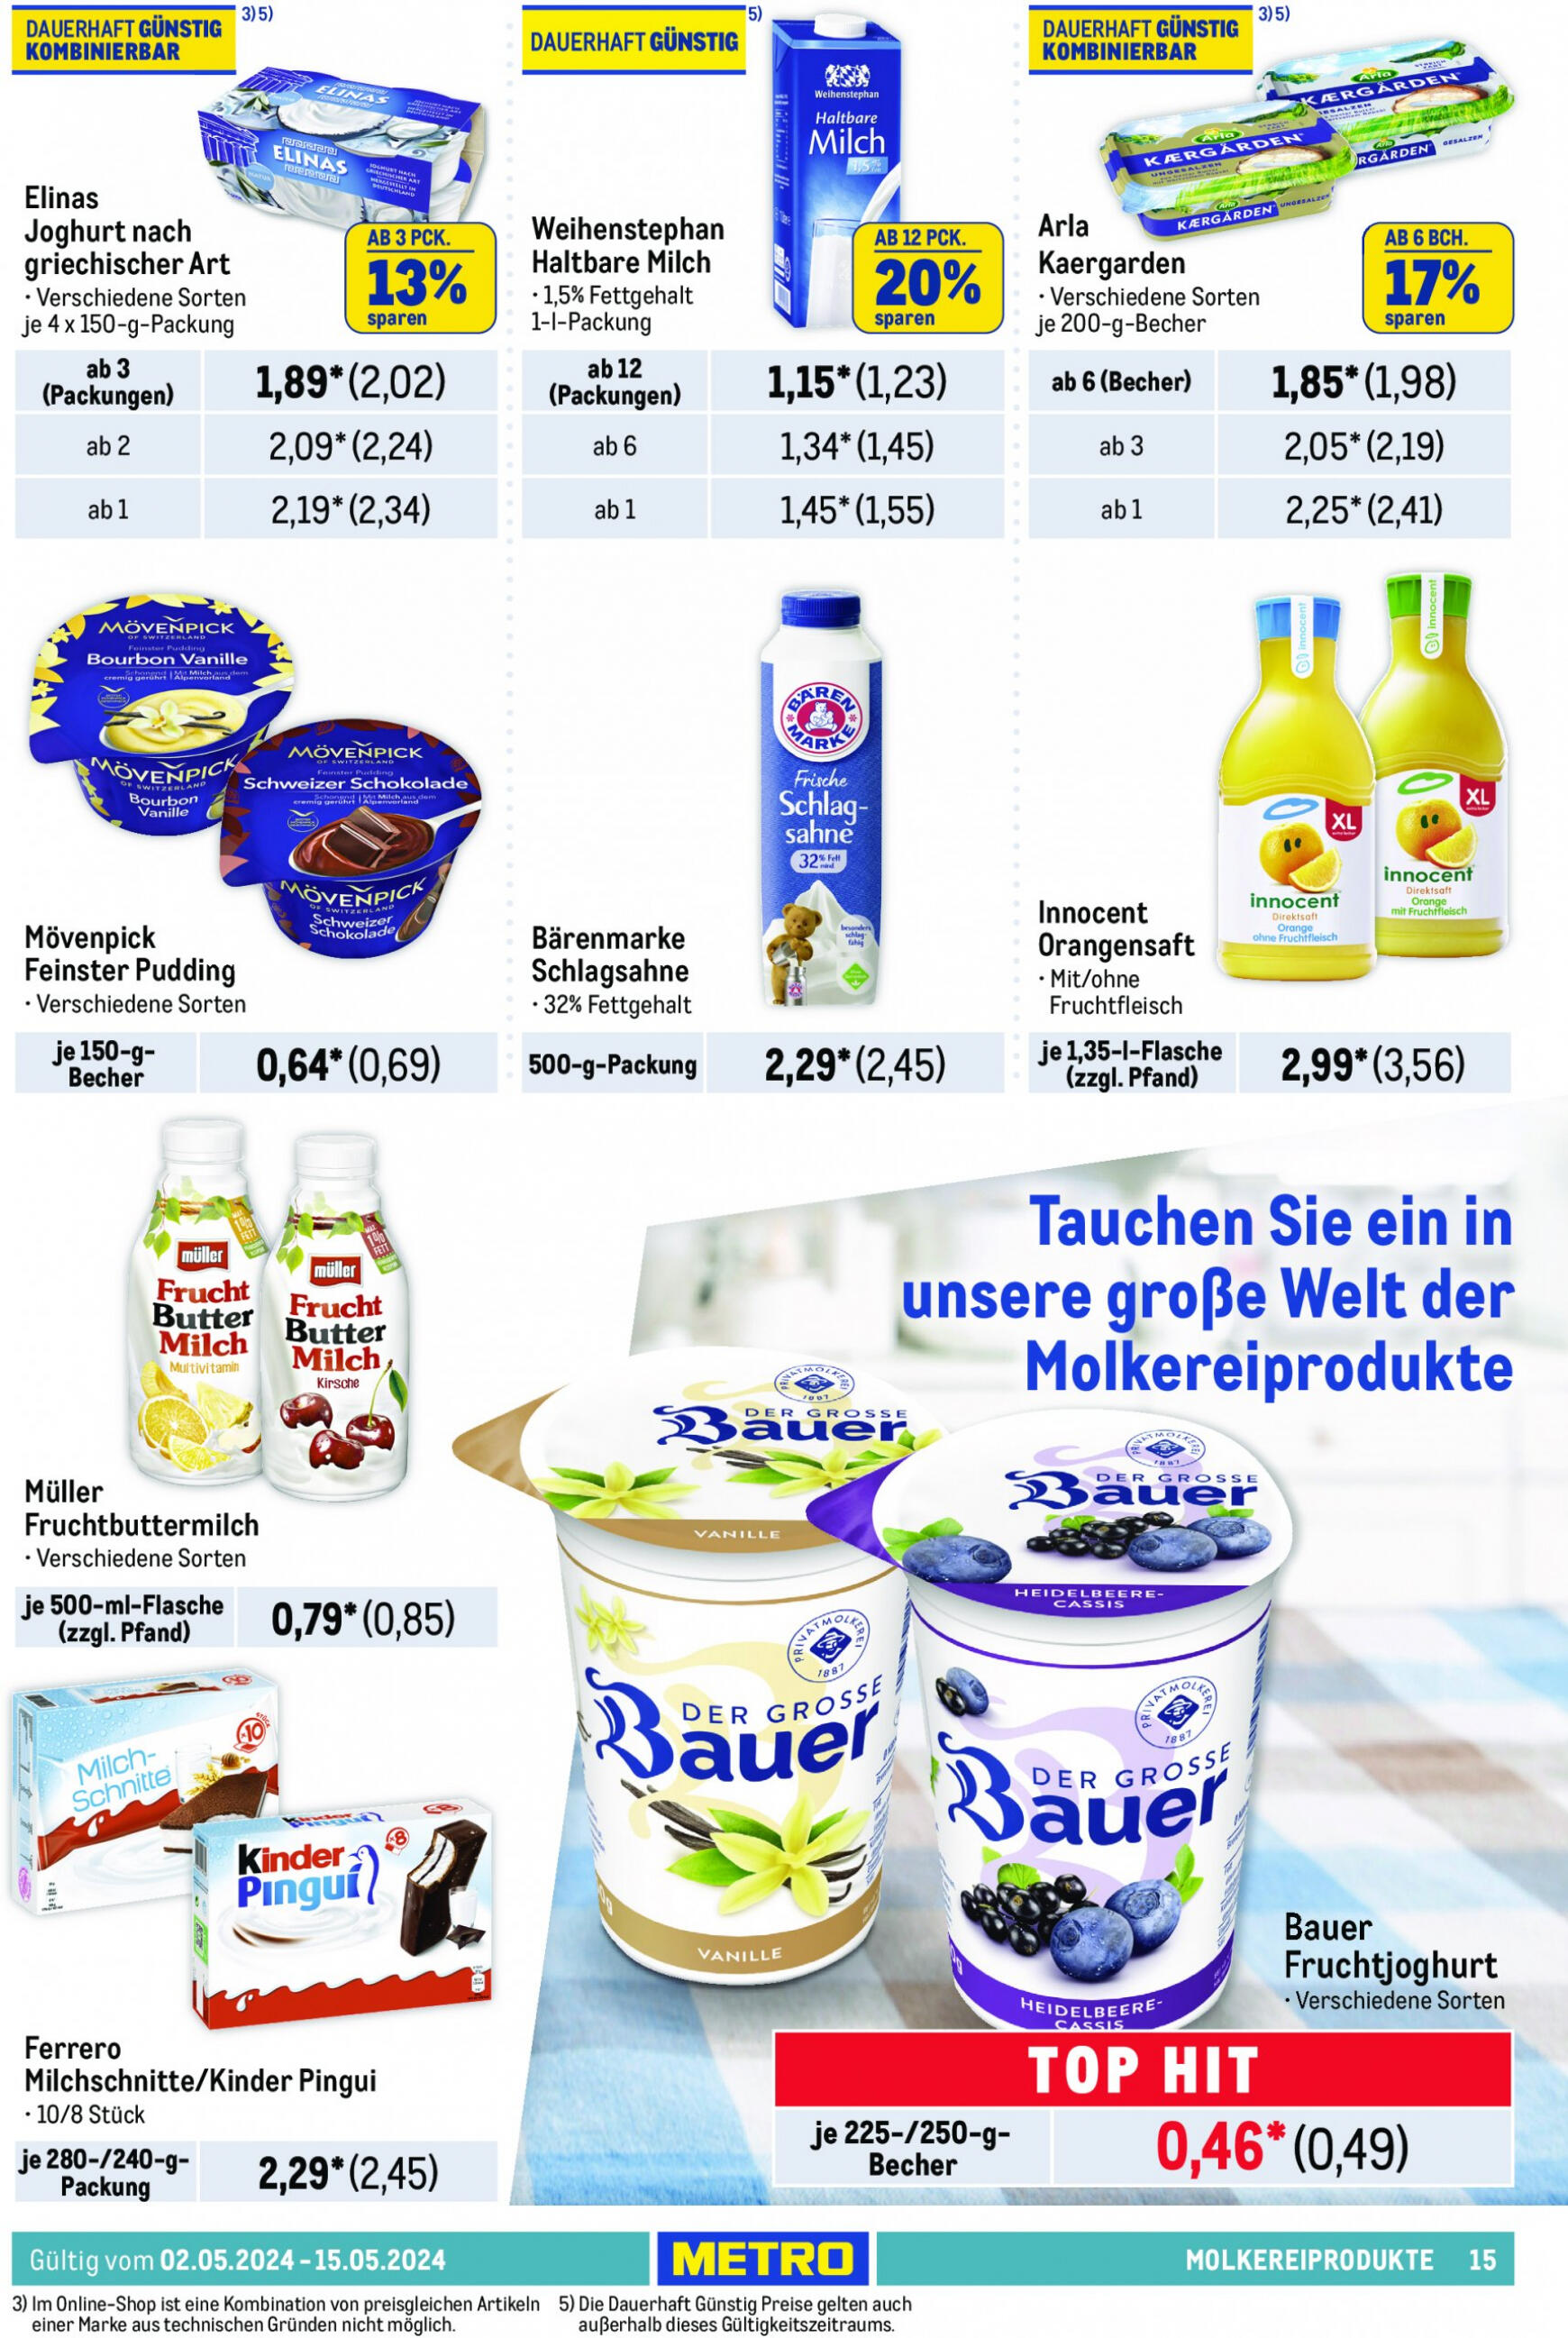 metro - Flyer Metro - Food-NonFood aktuell 02.05. - 15.05. - page: 15